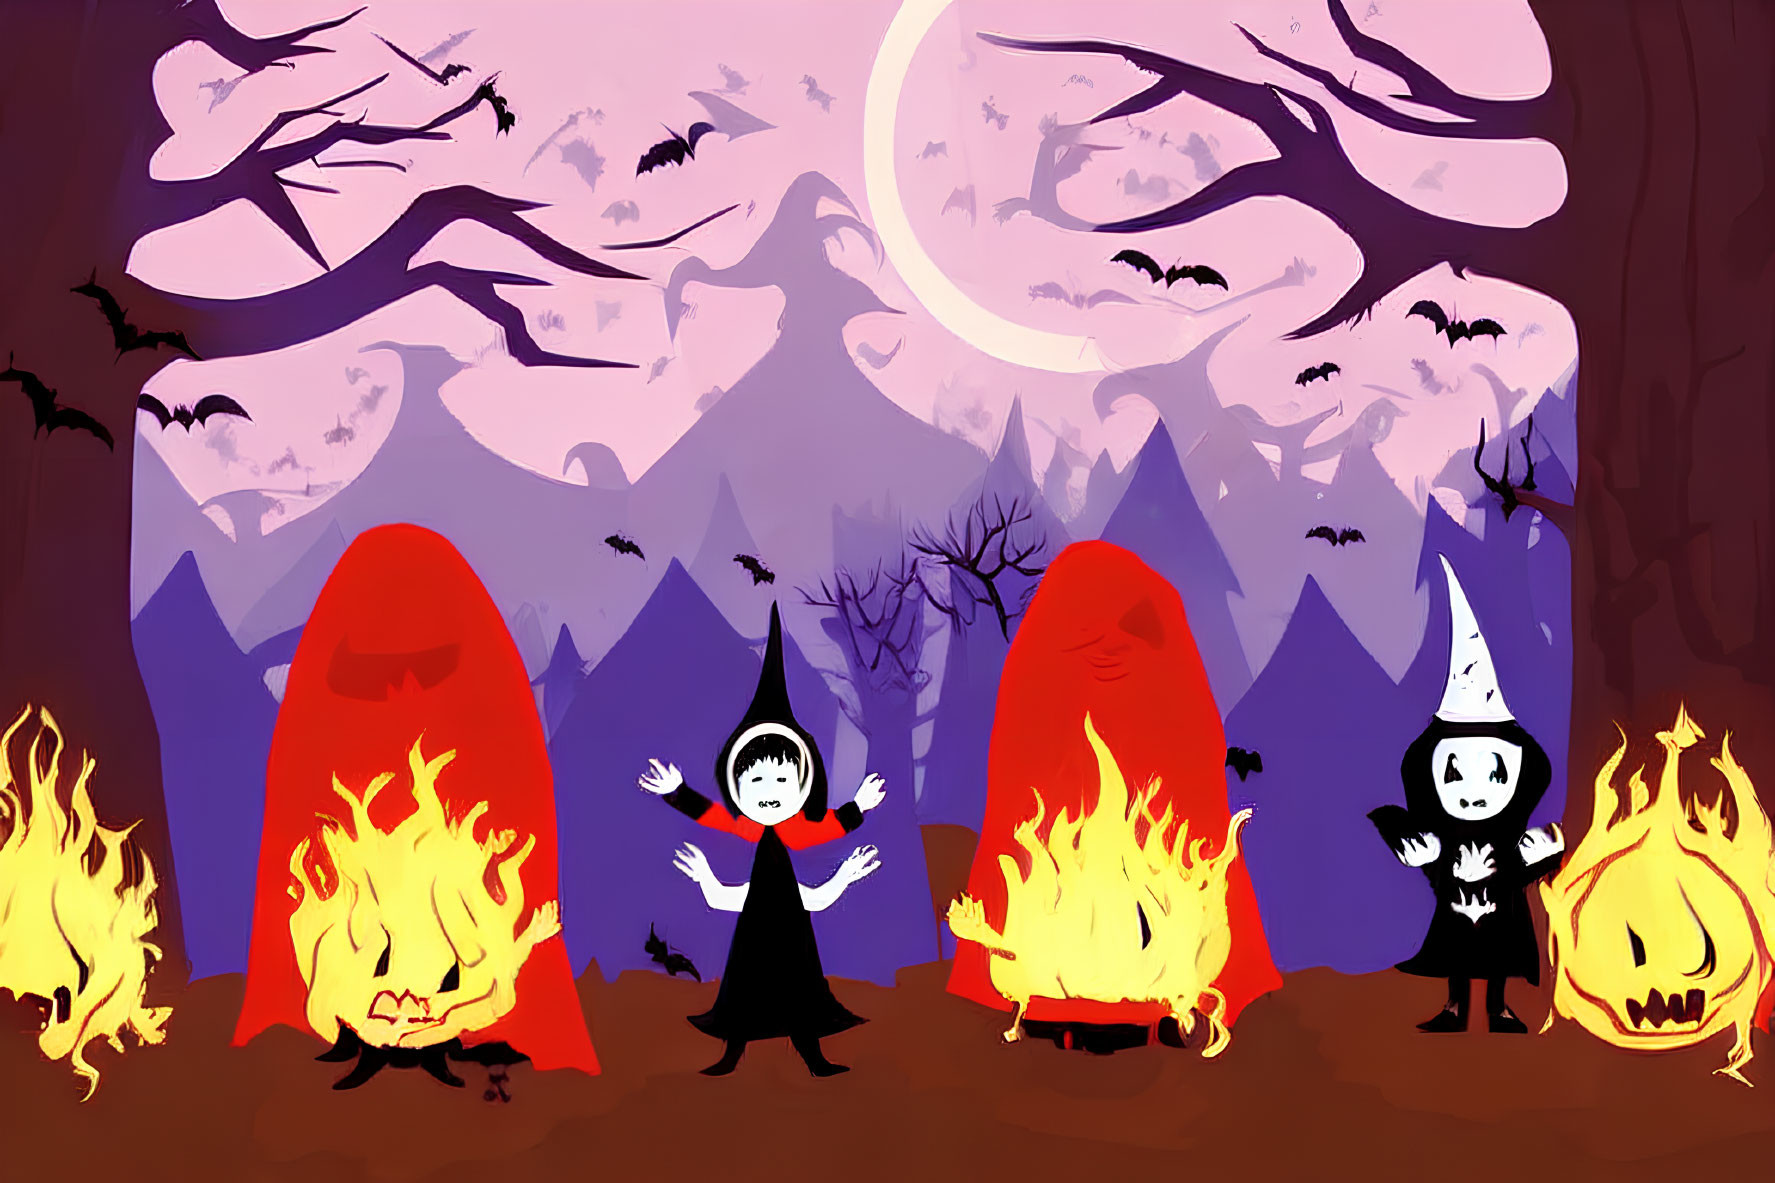 Three Halloween characters in costumes against a spooky backdrop with bats, full moon, leafless trees, and